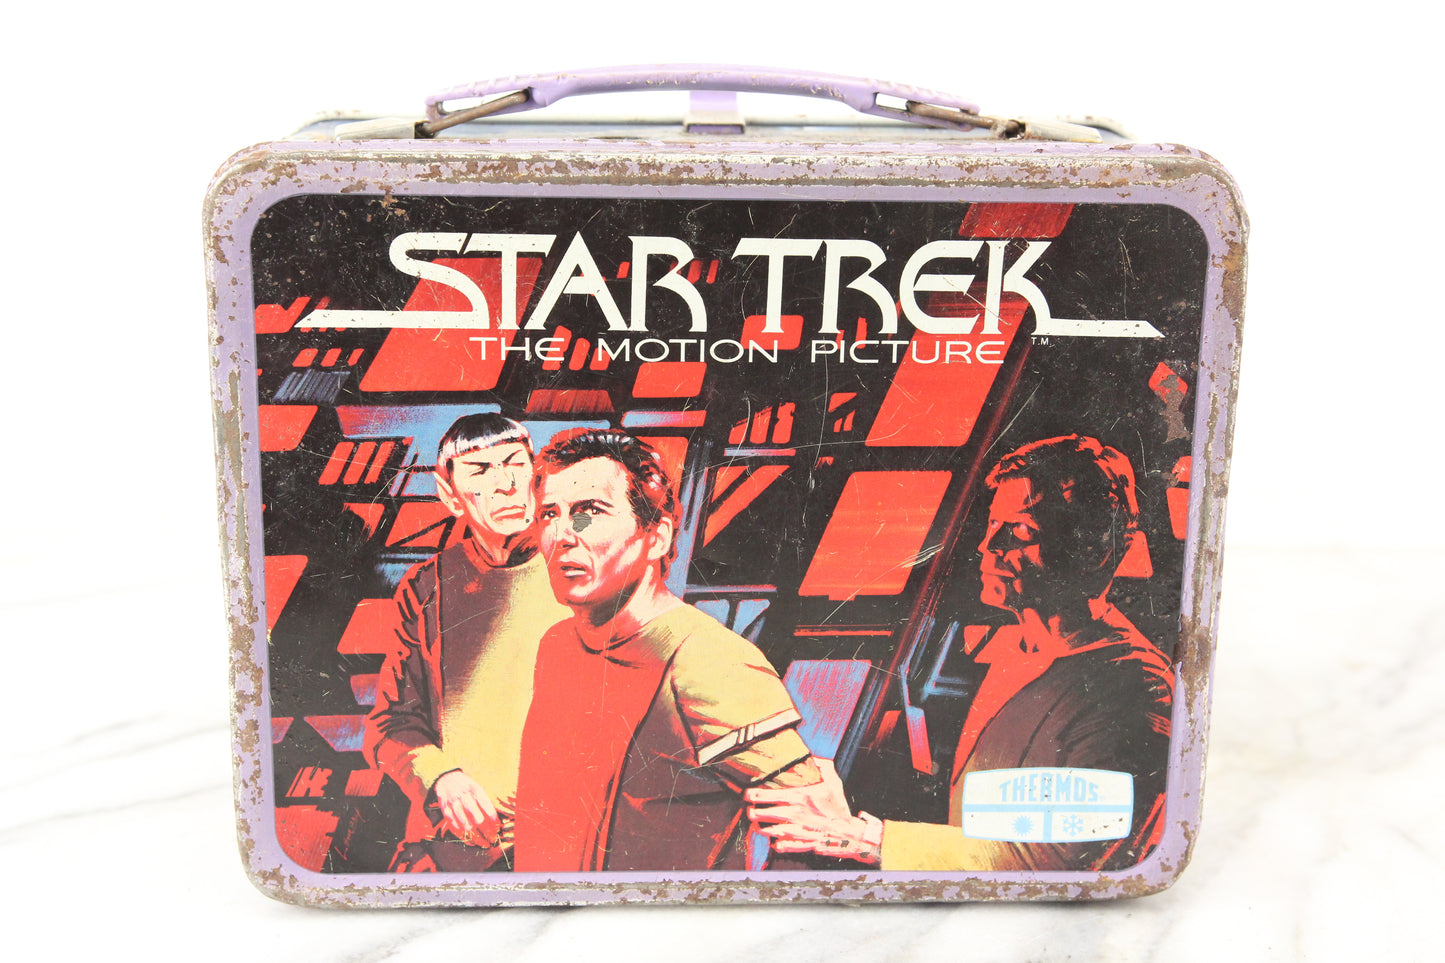 Star Trek The Motion Picture Thermos Brand Metal Lunch Box, 1979